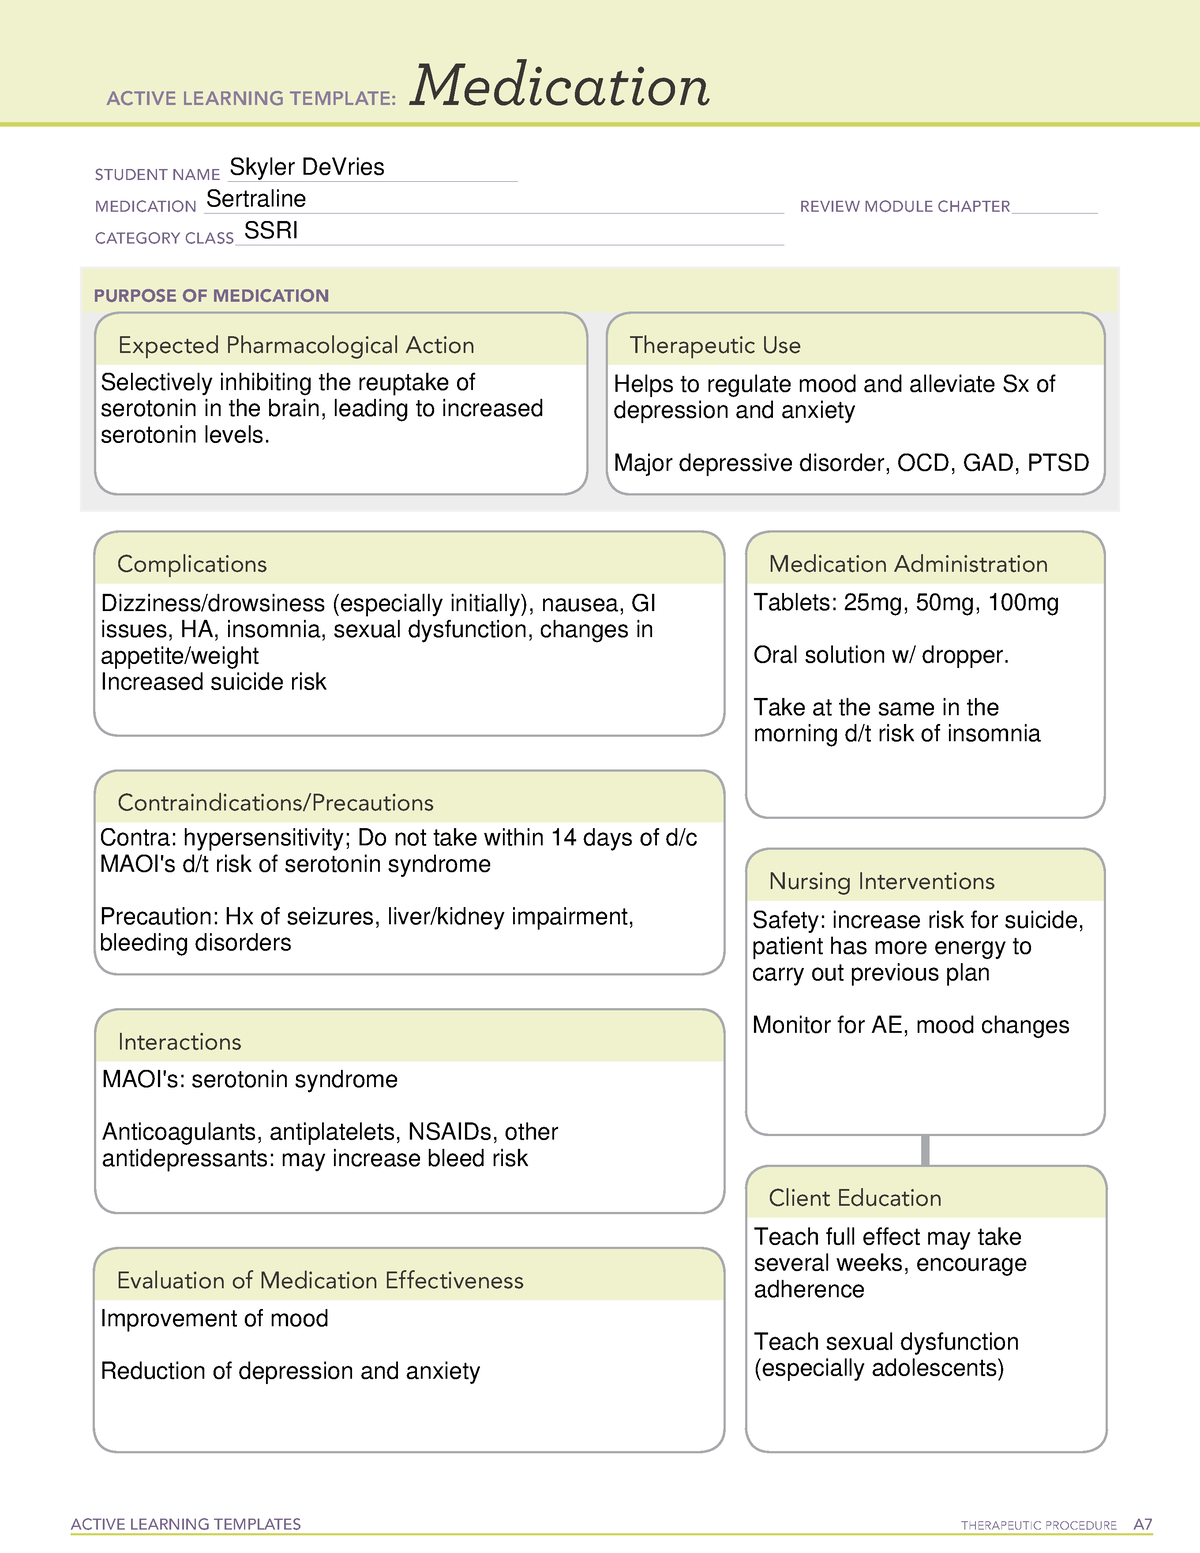 Med Sheet Sertraline ACTIVE LEARNING TEMPLATES THERAPEUTIC PROCEDURE